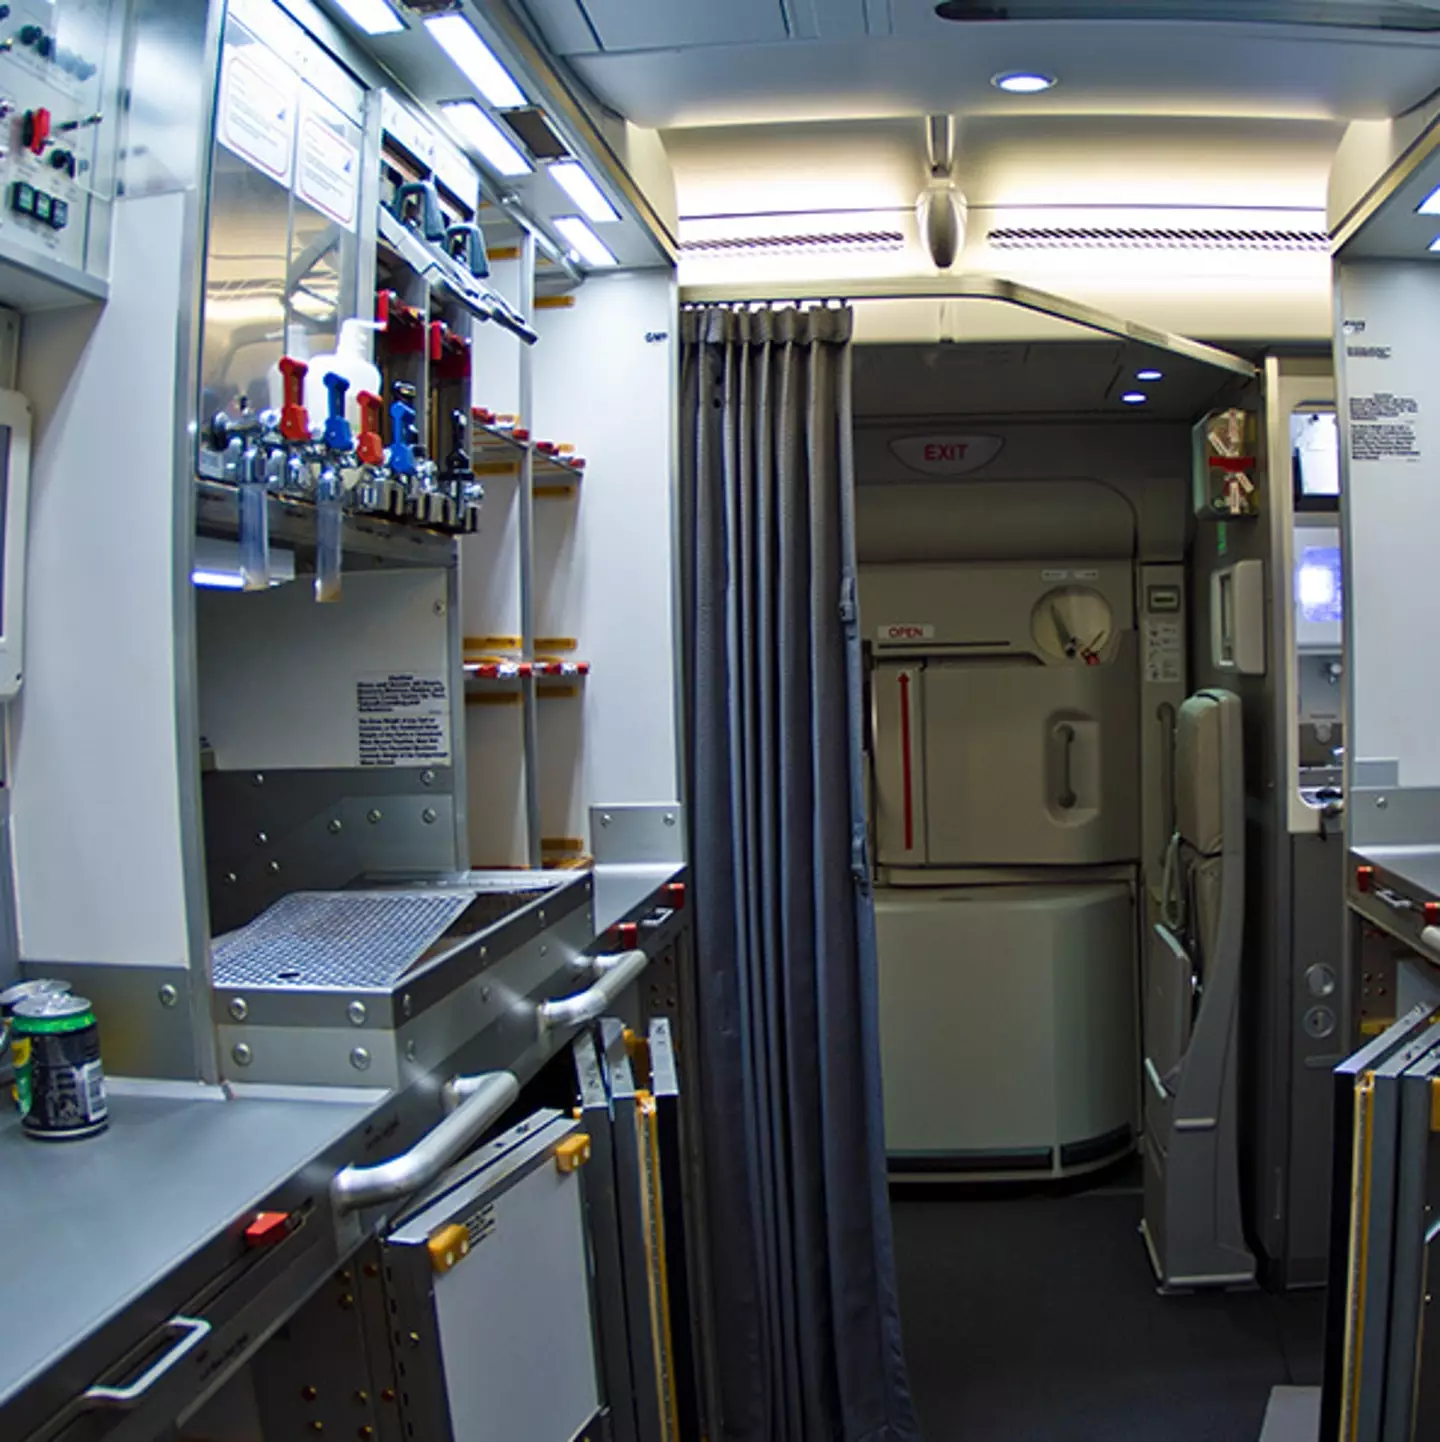 Little-known hidden rooms inside every plane that passengers will never see